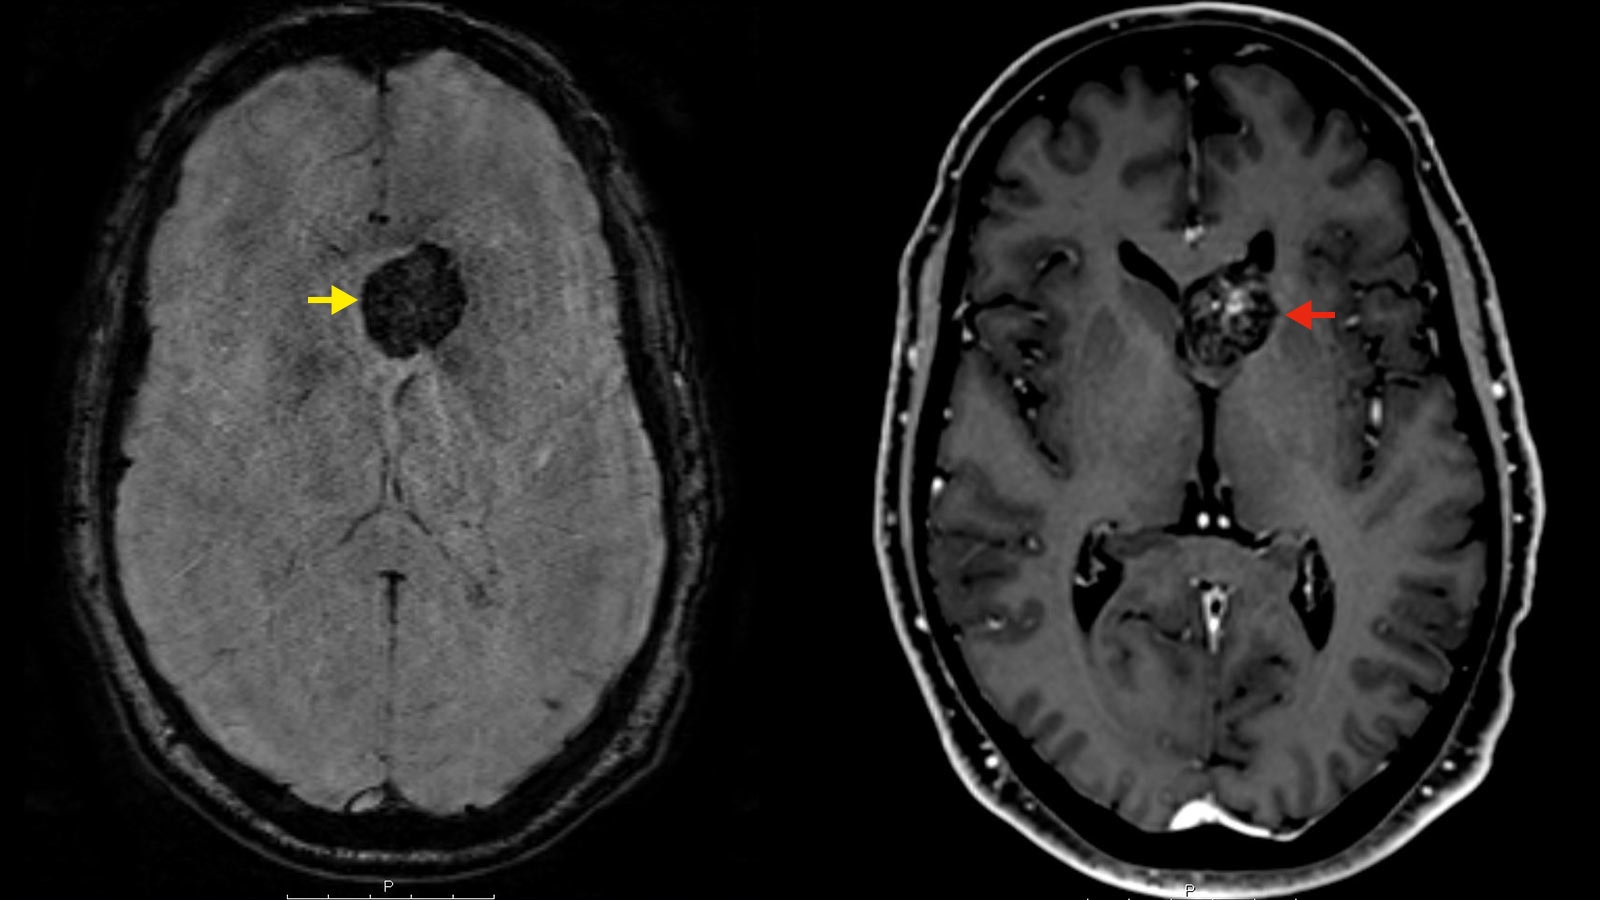 Two MRI images of an intraventricular cavernoma juxtaposed. SWI sequence on the left. The cavernoma is marked with a yellow arrow and appears black in the image. On the right, contrast-enhanced sequence. The cavernoma is marked with red arrow.